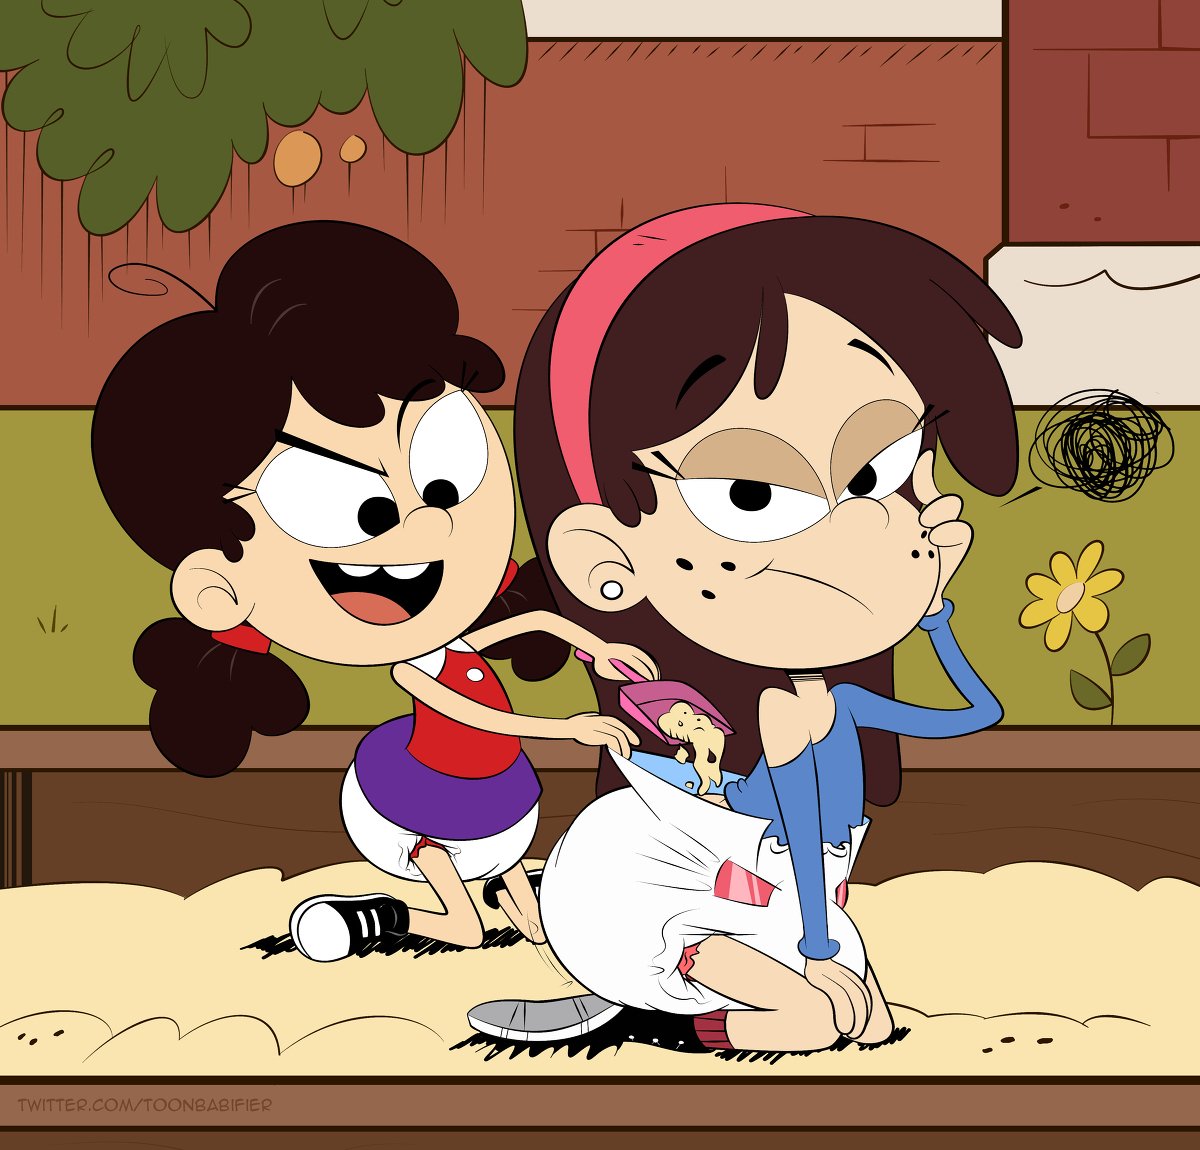 “Chang Sisters #diaper #the_loud_house #sid_chang #adelaide_chang https://t...